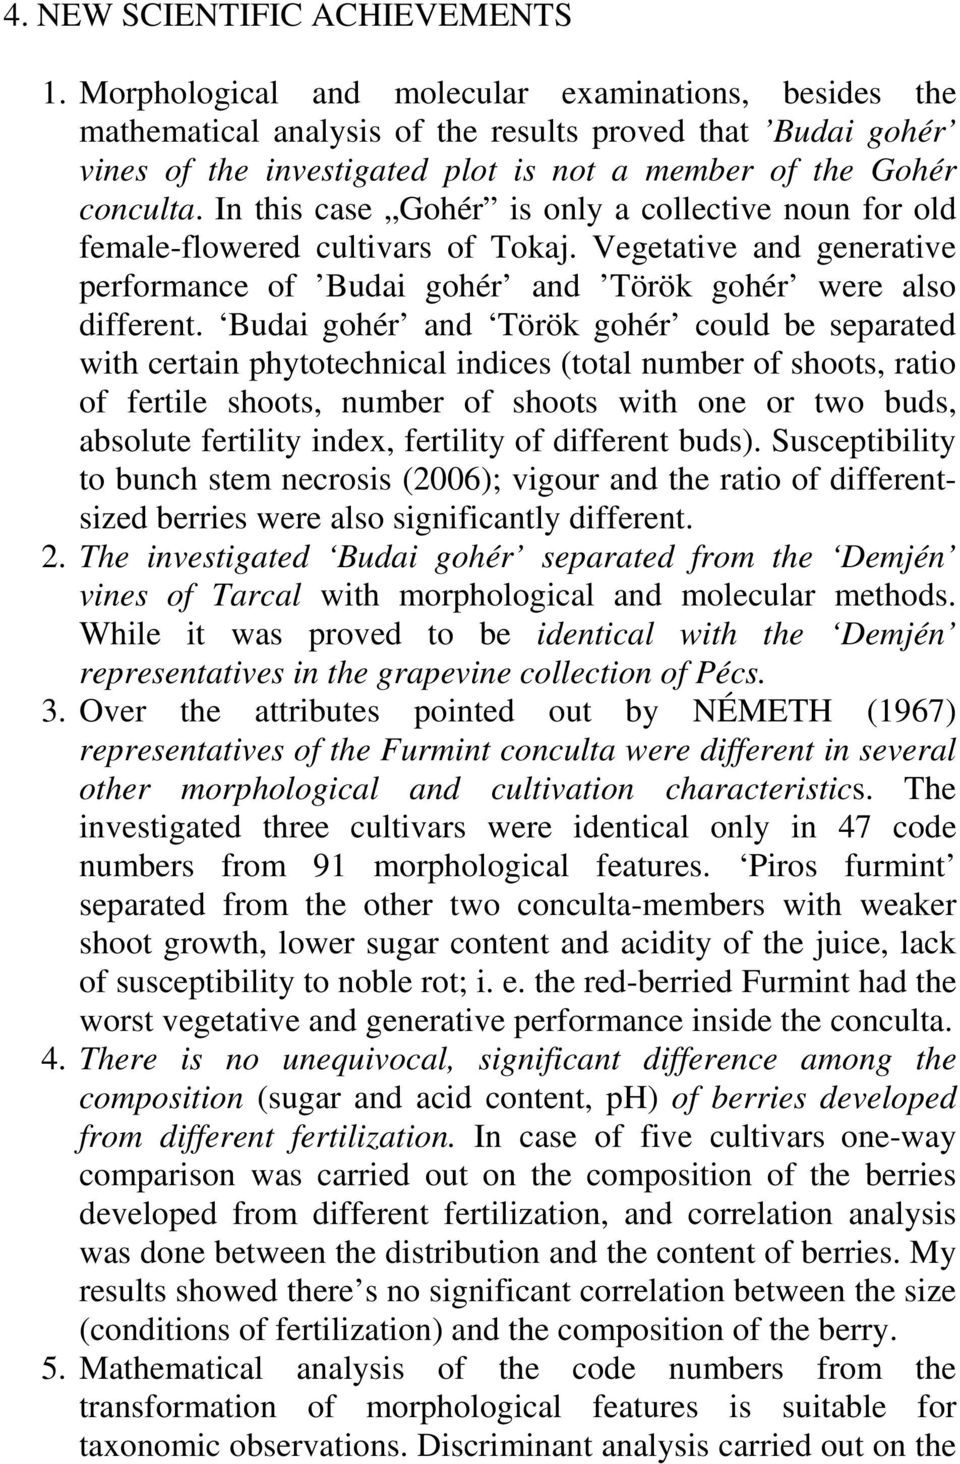 In this case Gohér is only a collective noun for old female-flowered cultivars of Tokaj. Vegetative and generative performance of Budai gohér and Török gohér were also different.